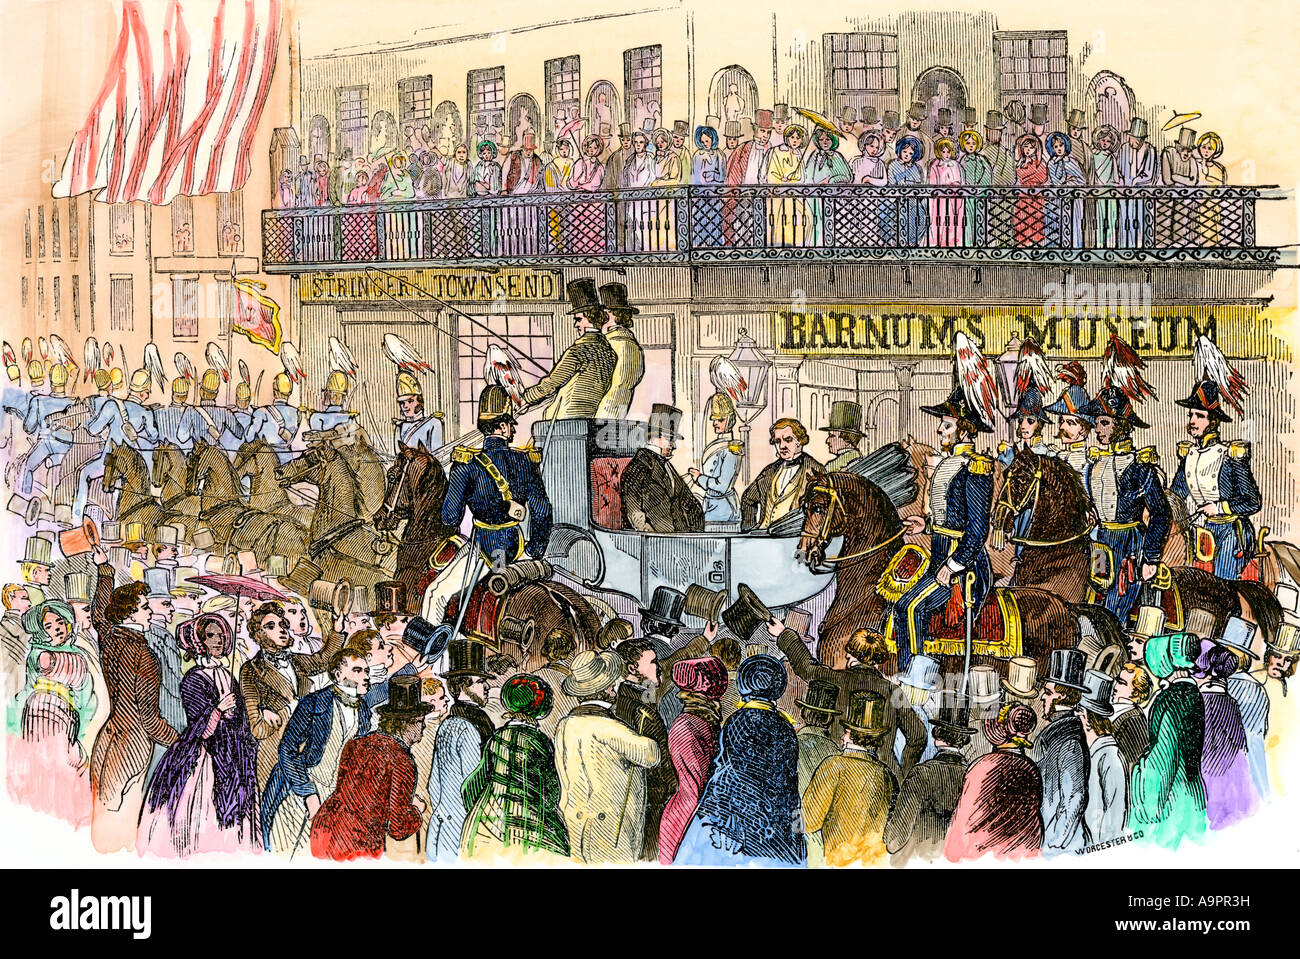 President Millard Fillmore in a procession passing Barnums Museum on Broadway in New York City 1851. Hand-colored woodcut Stock Photo